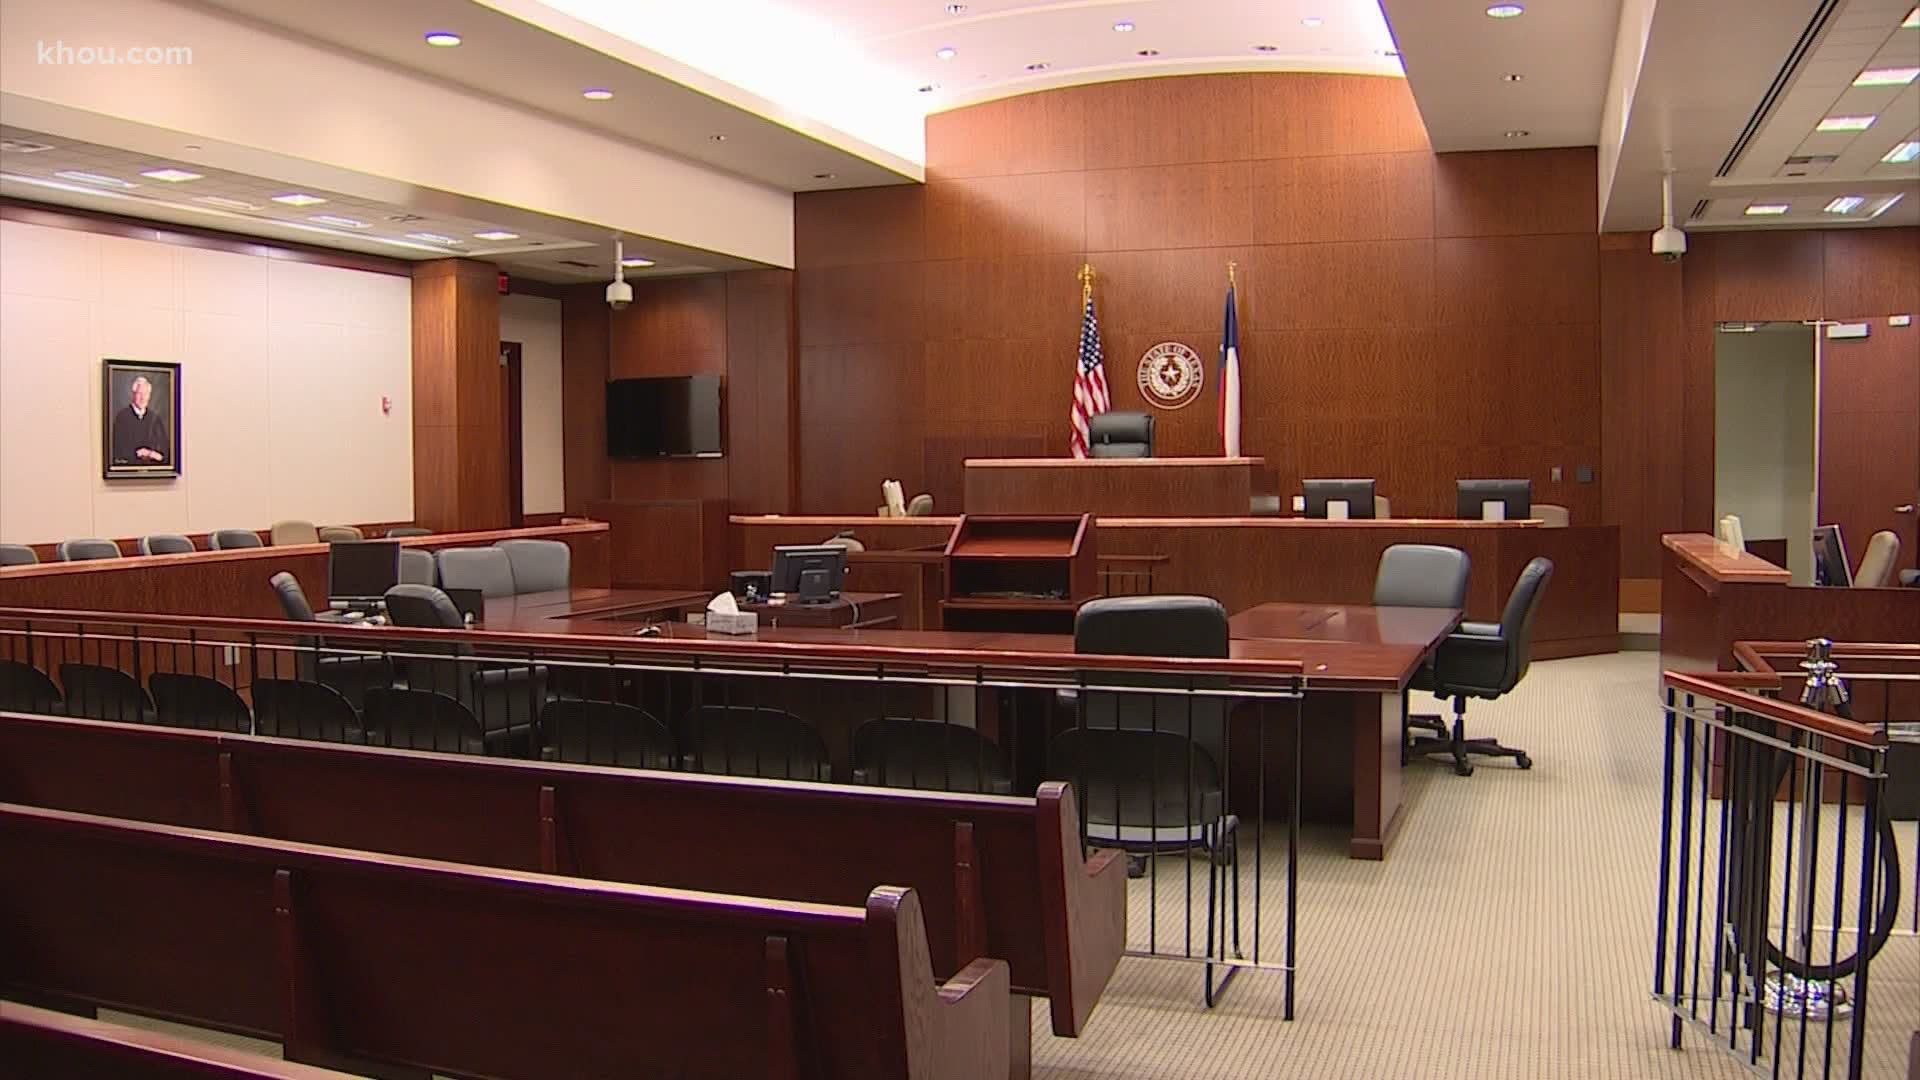 In response to rising coronavirus cases, the city of Houston has suspended jury trials and jury duty at all municipal courts.